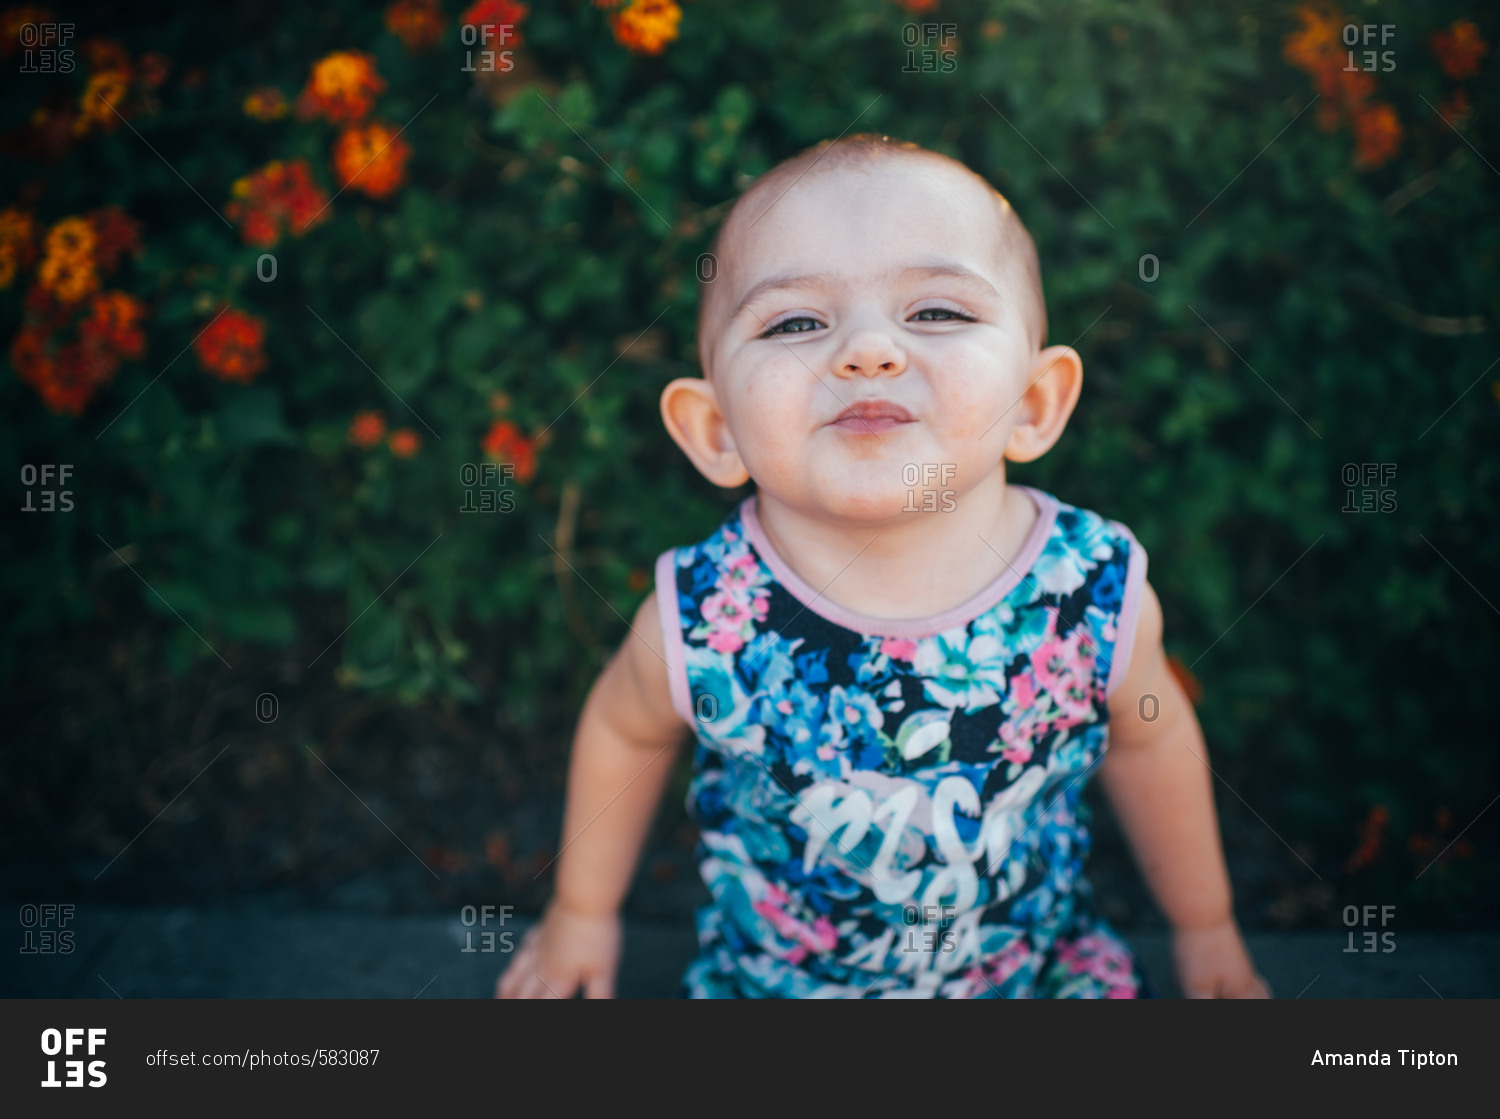 Toddler making smiling face by flowers